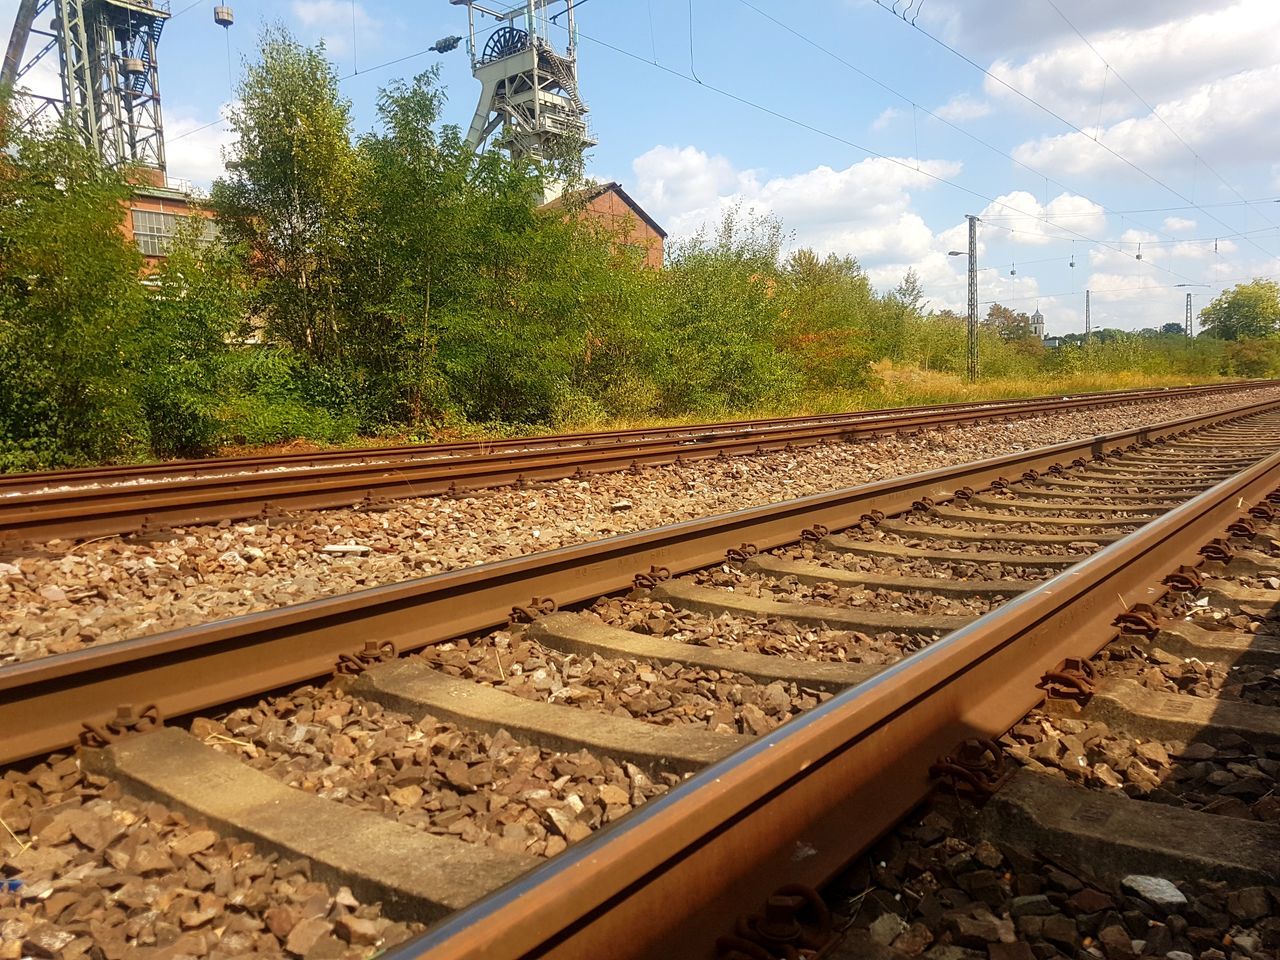 rail transportation, railroad track, track, plant, transportation, sky, tree, nature, day, no people, public transportation, sunlight, mode of transportation, gravel, cloud - sky, metal, travel, solid, direction, growth, outdoors